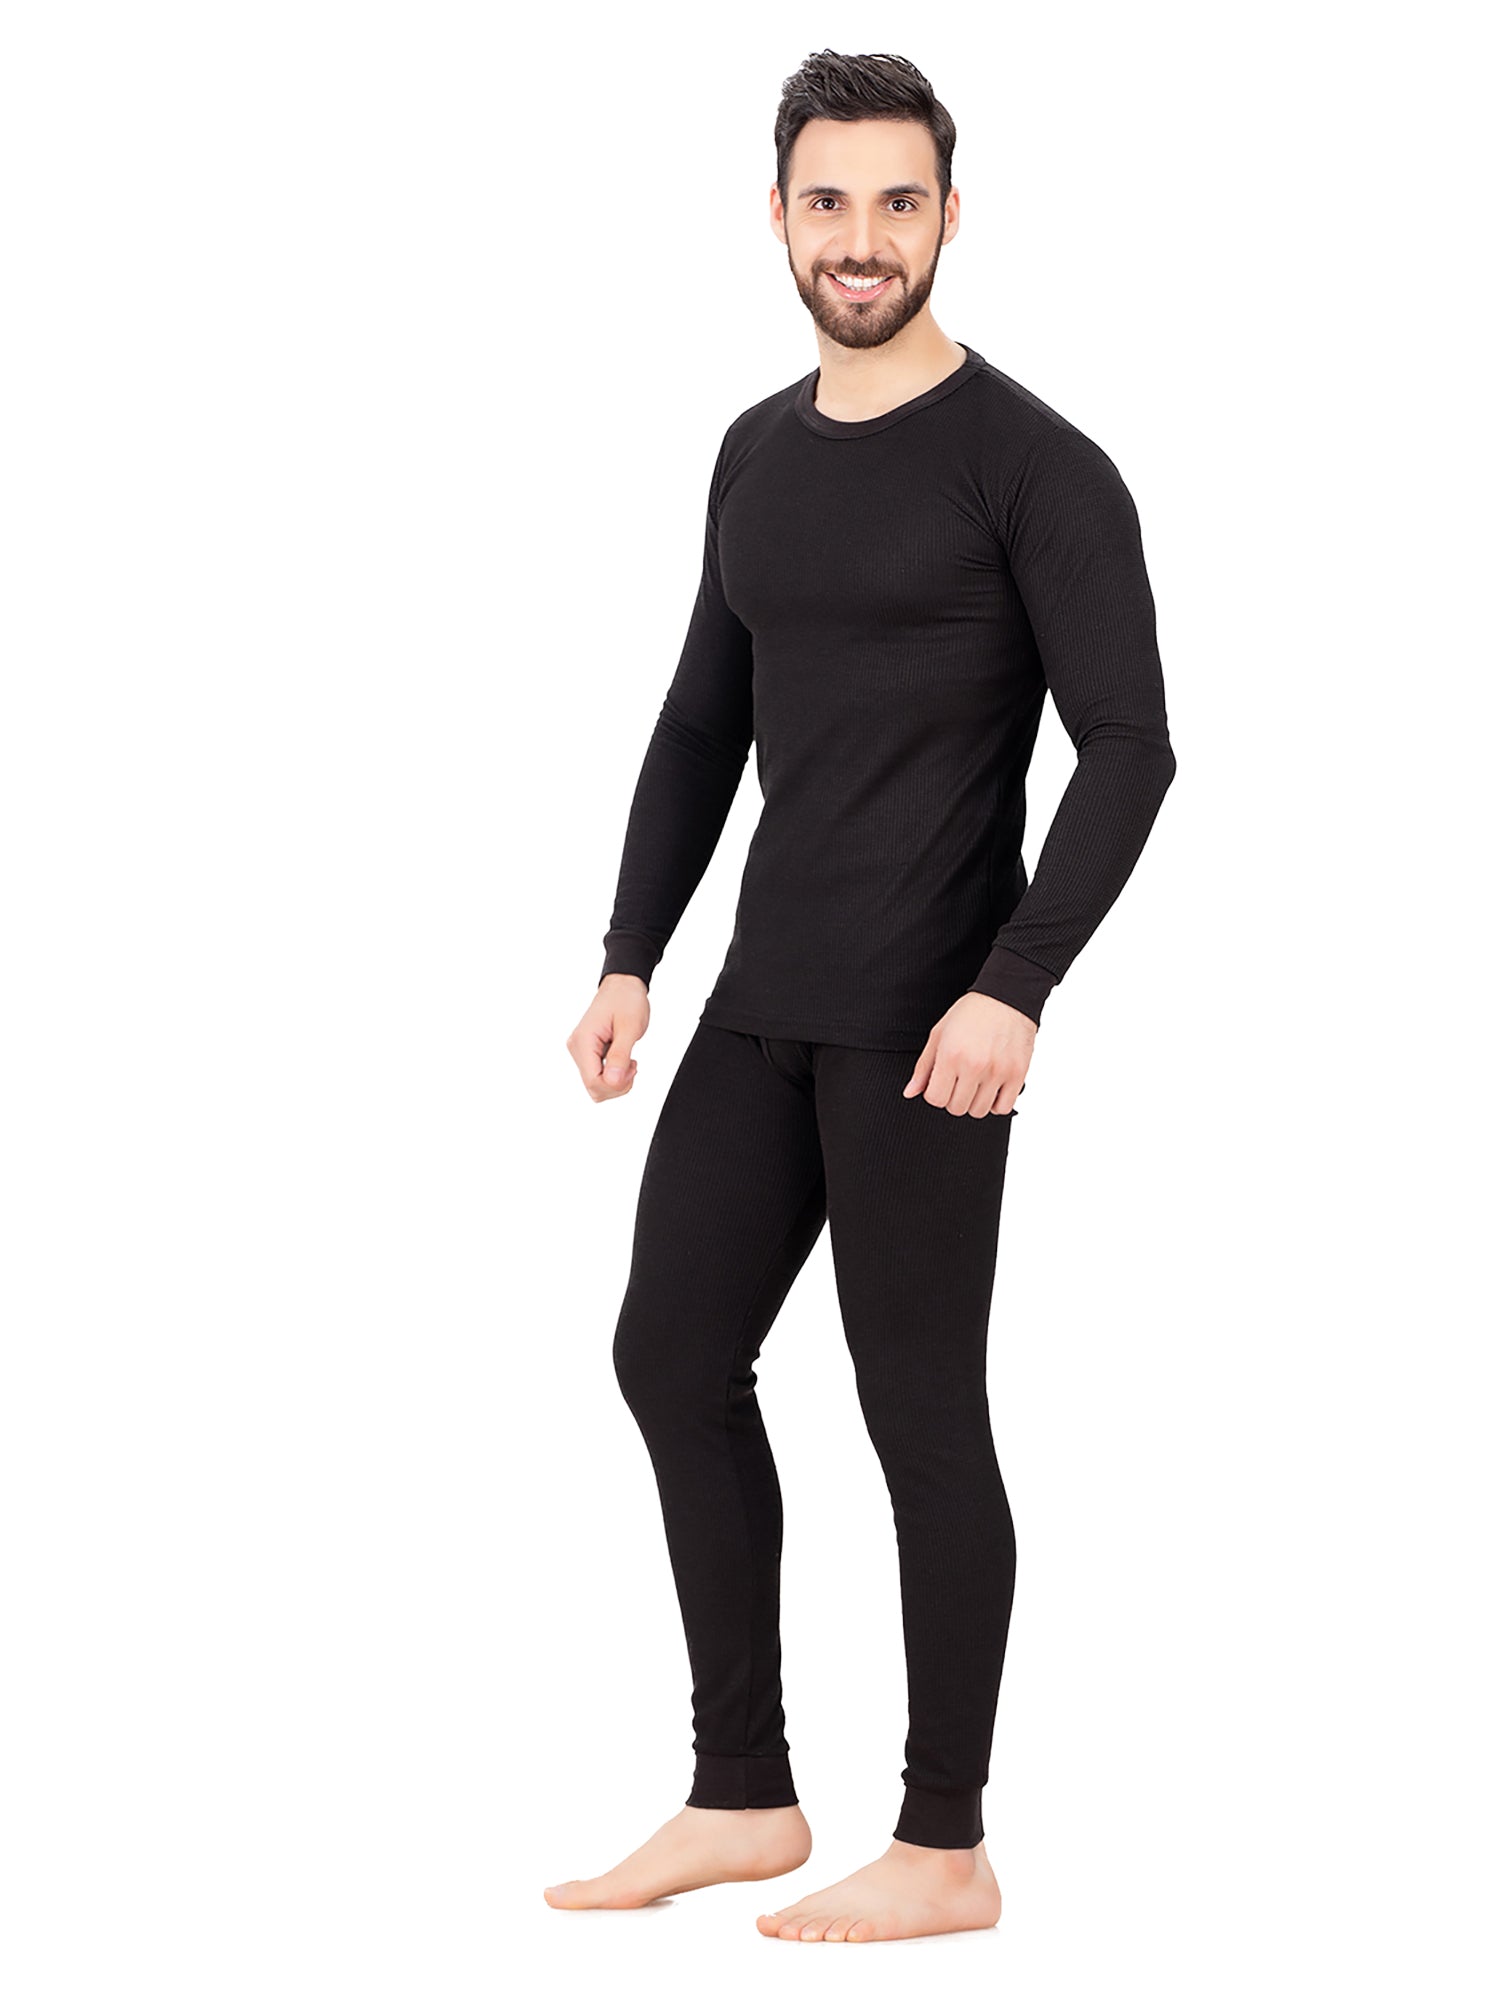 Place & Street | Thermal Underwear and Sleepwear for Men and Women